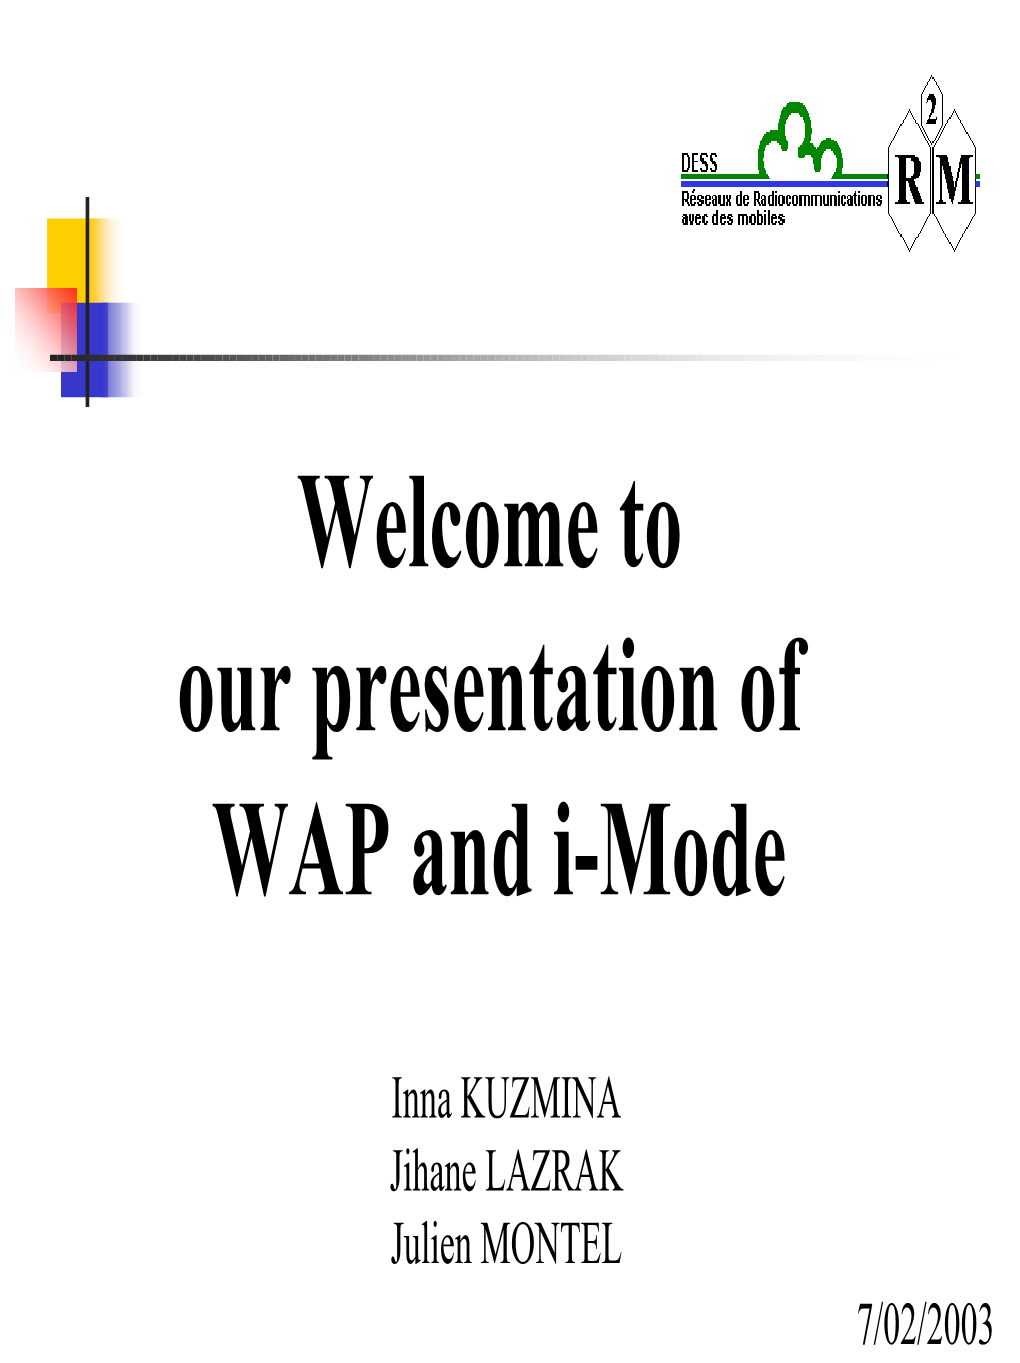 Welcome to Our Presentation of WAP and I-Mode